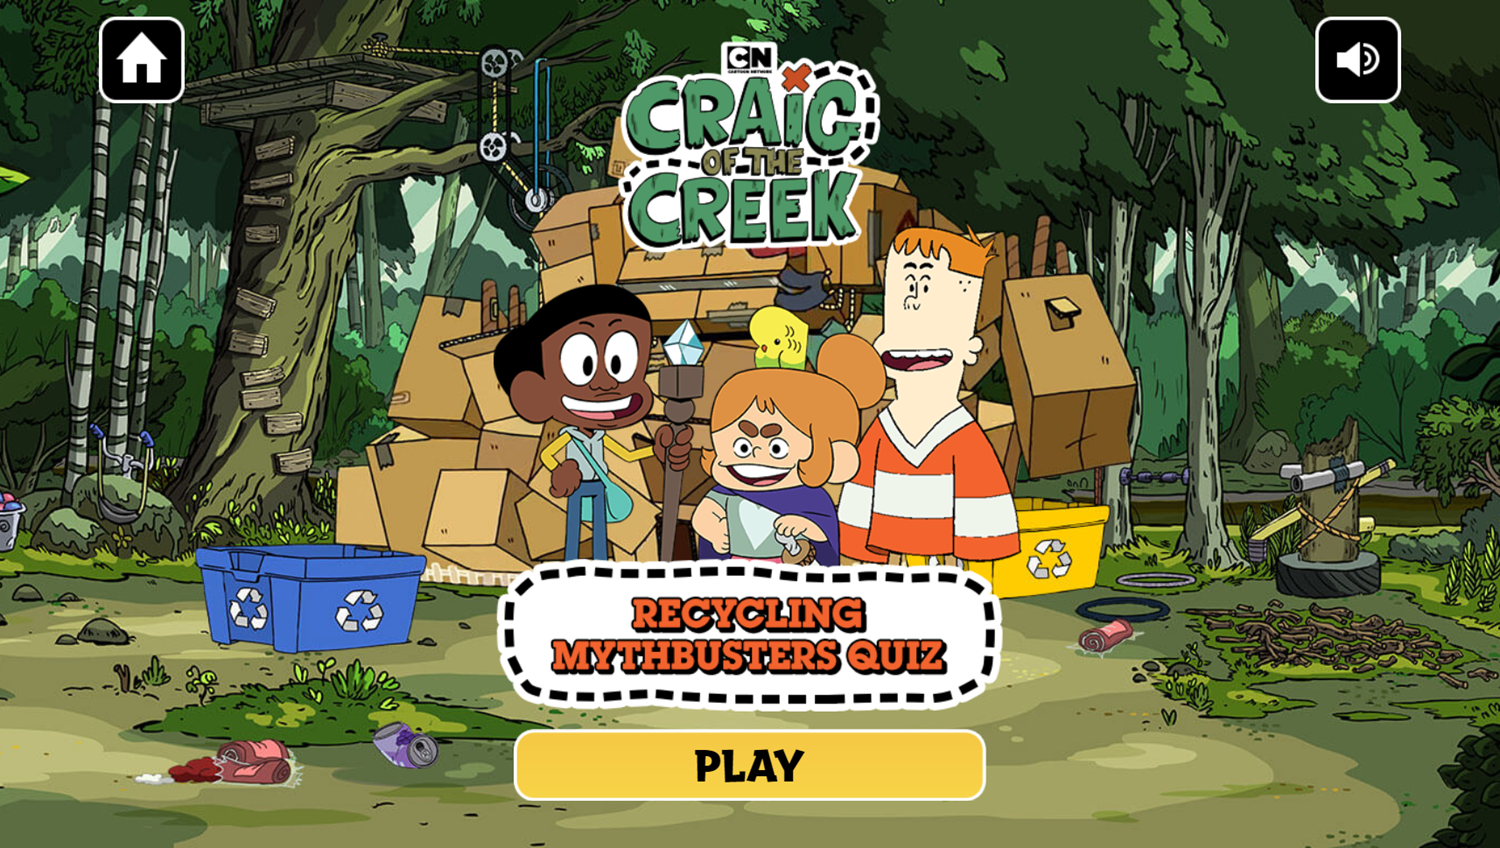 Craig of the Creek Recycling Mythbusters Game Welcome Screen Screenshot.